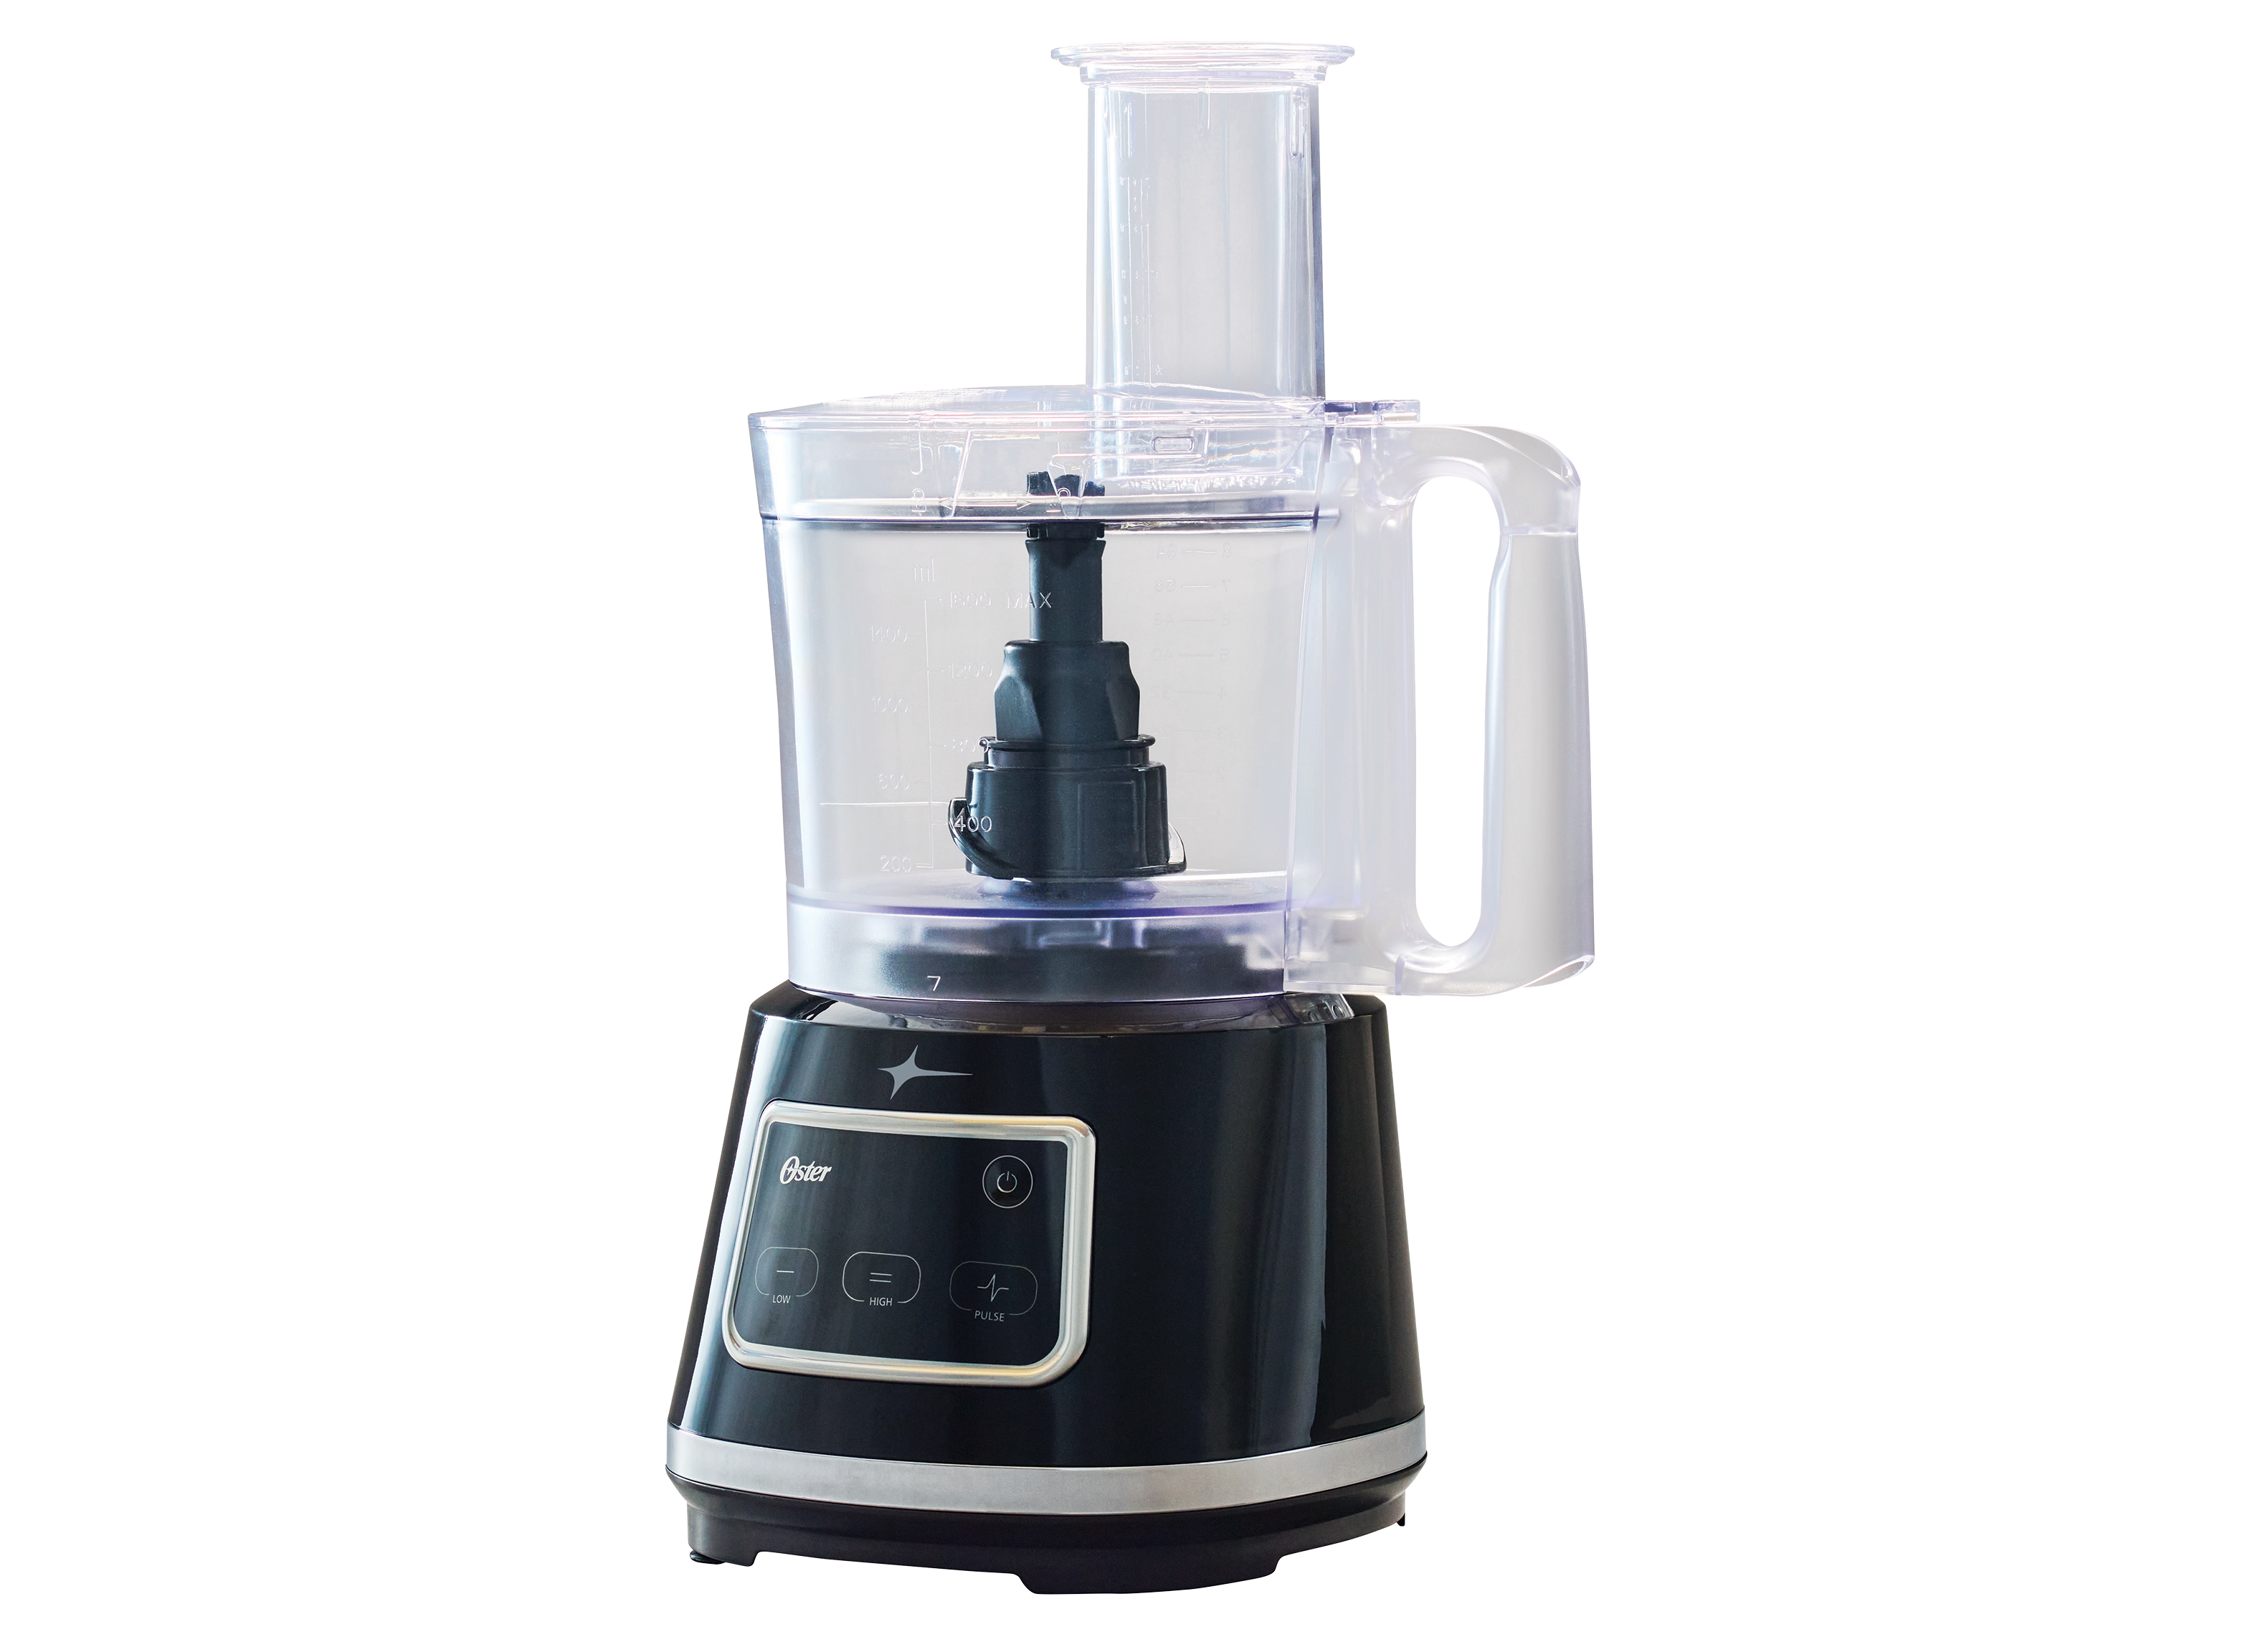 Oster 10 Cups FPSTFPMP Food Processor & Chopper Review - Consumer